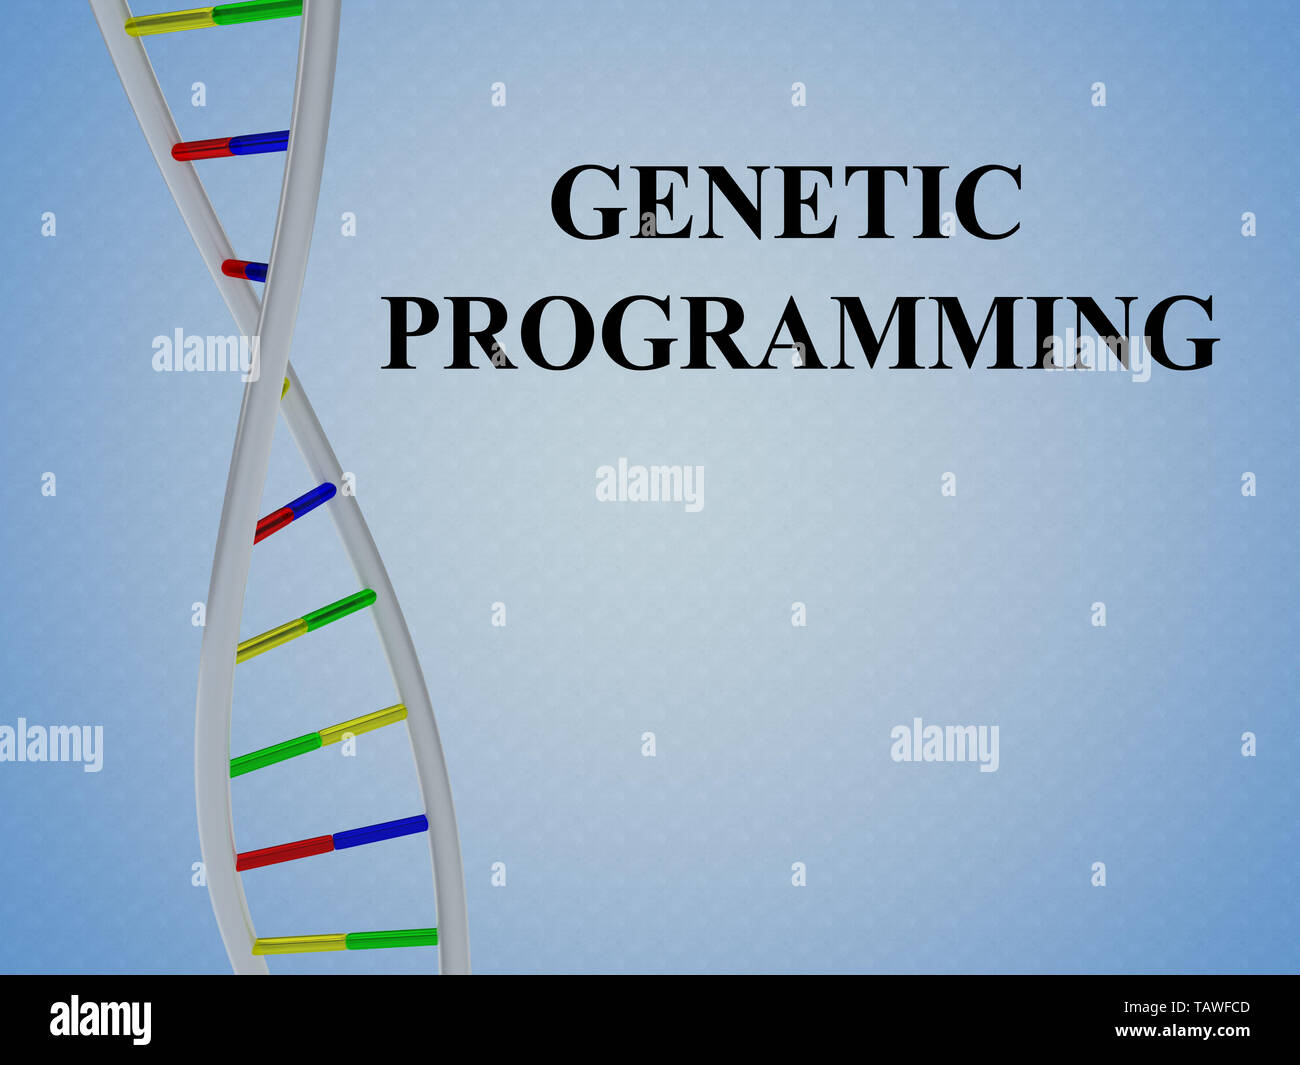 3D illustration of GENETIC PROGRAMMING script with DNA double helix , isolated on colored pattern. Stock Photo